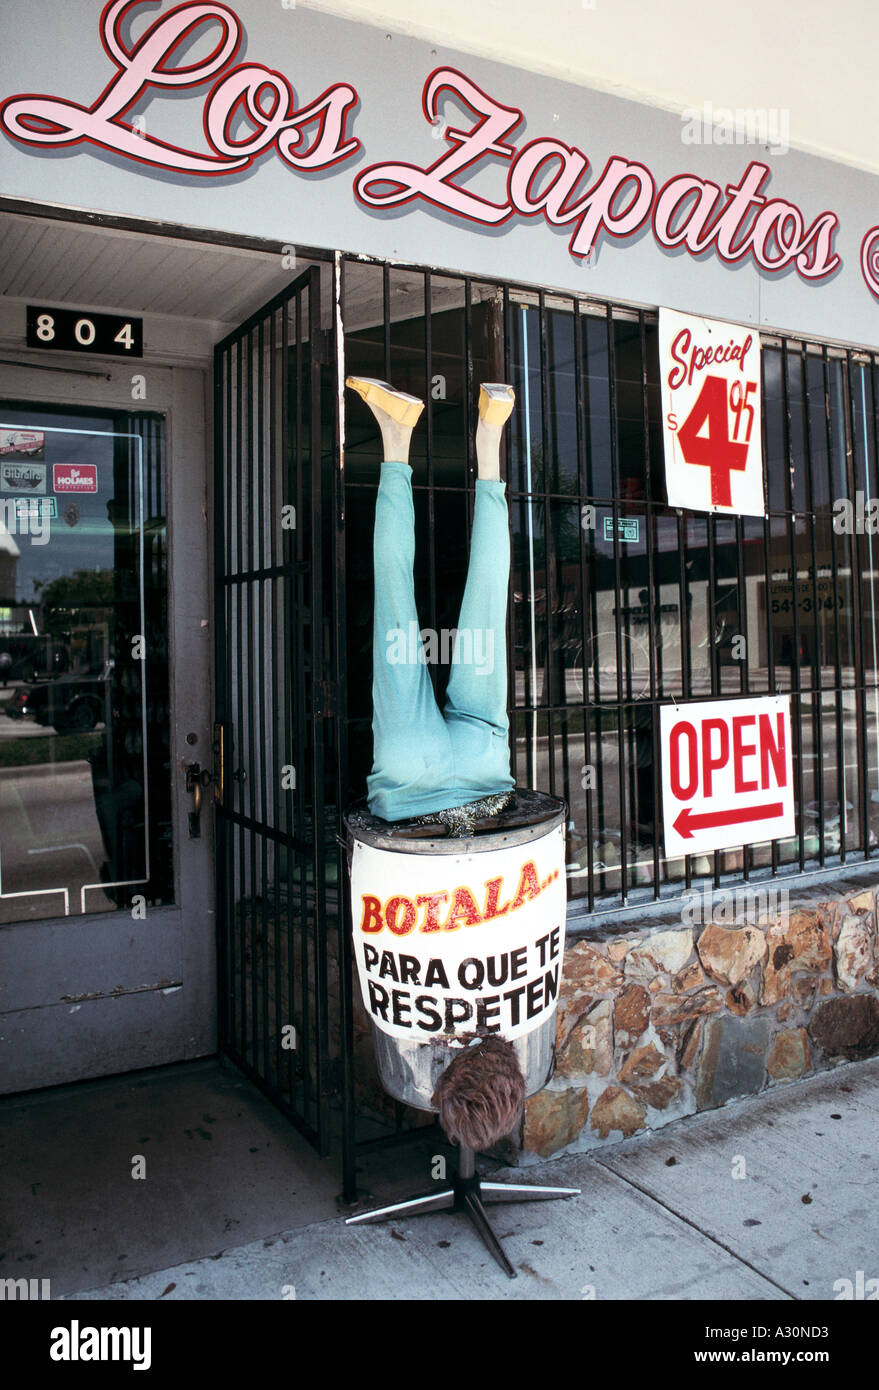 A pair of legs sticking out of a bin in front of a shoe shop in 'Little Havana', Miami, USA; a hispanic, mostly Cuban area. Stock Photo